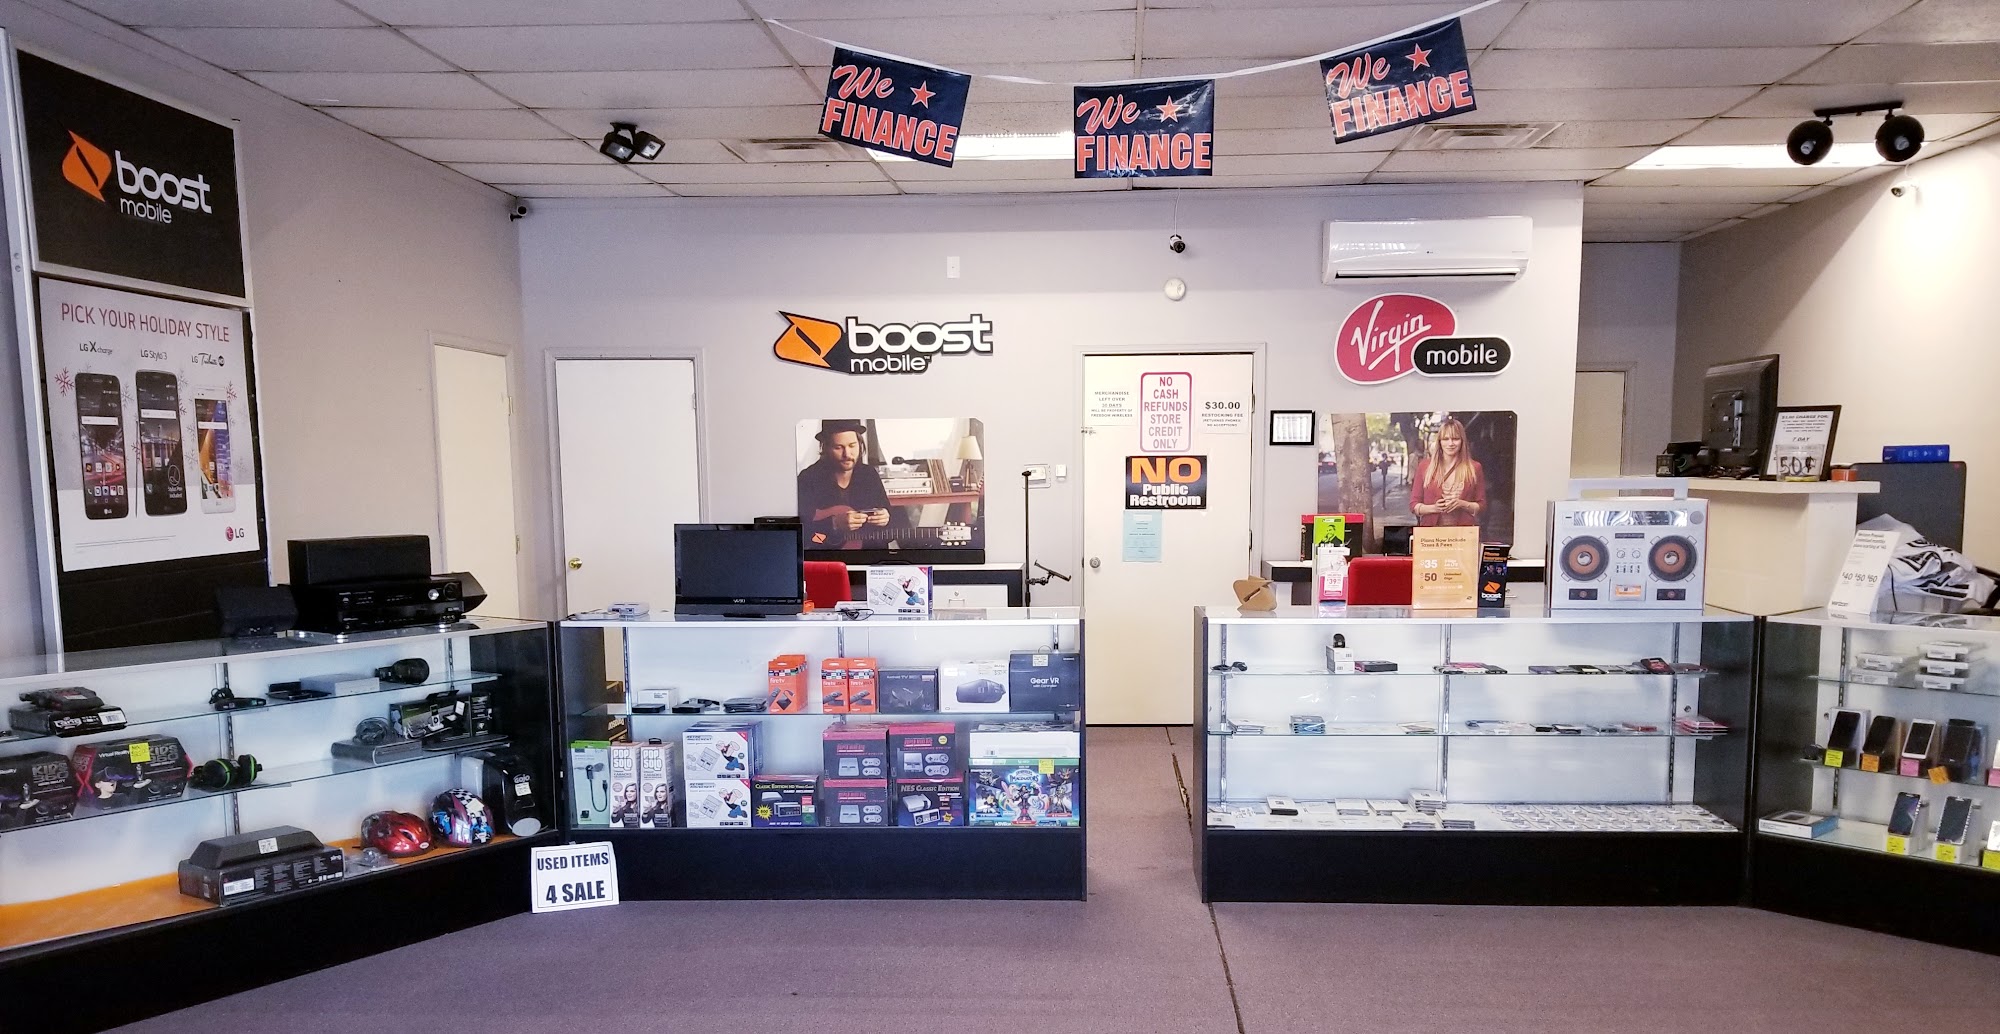 Freedom Wireless / Boost Mobile